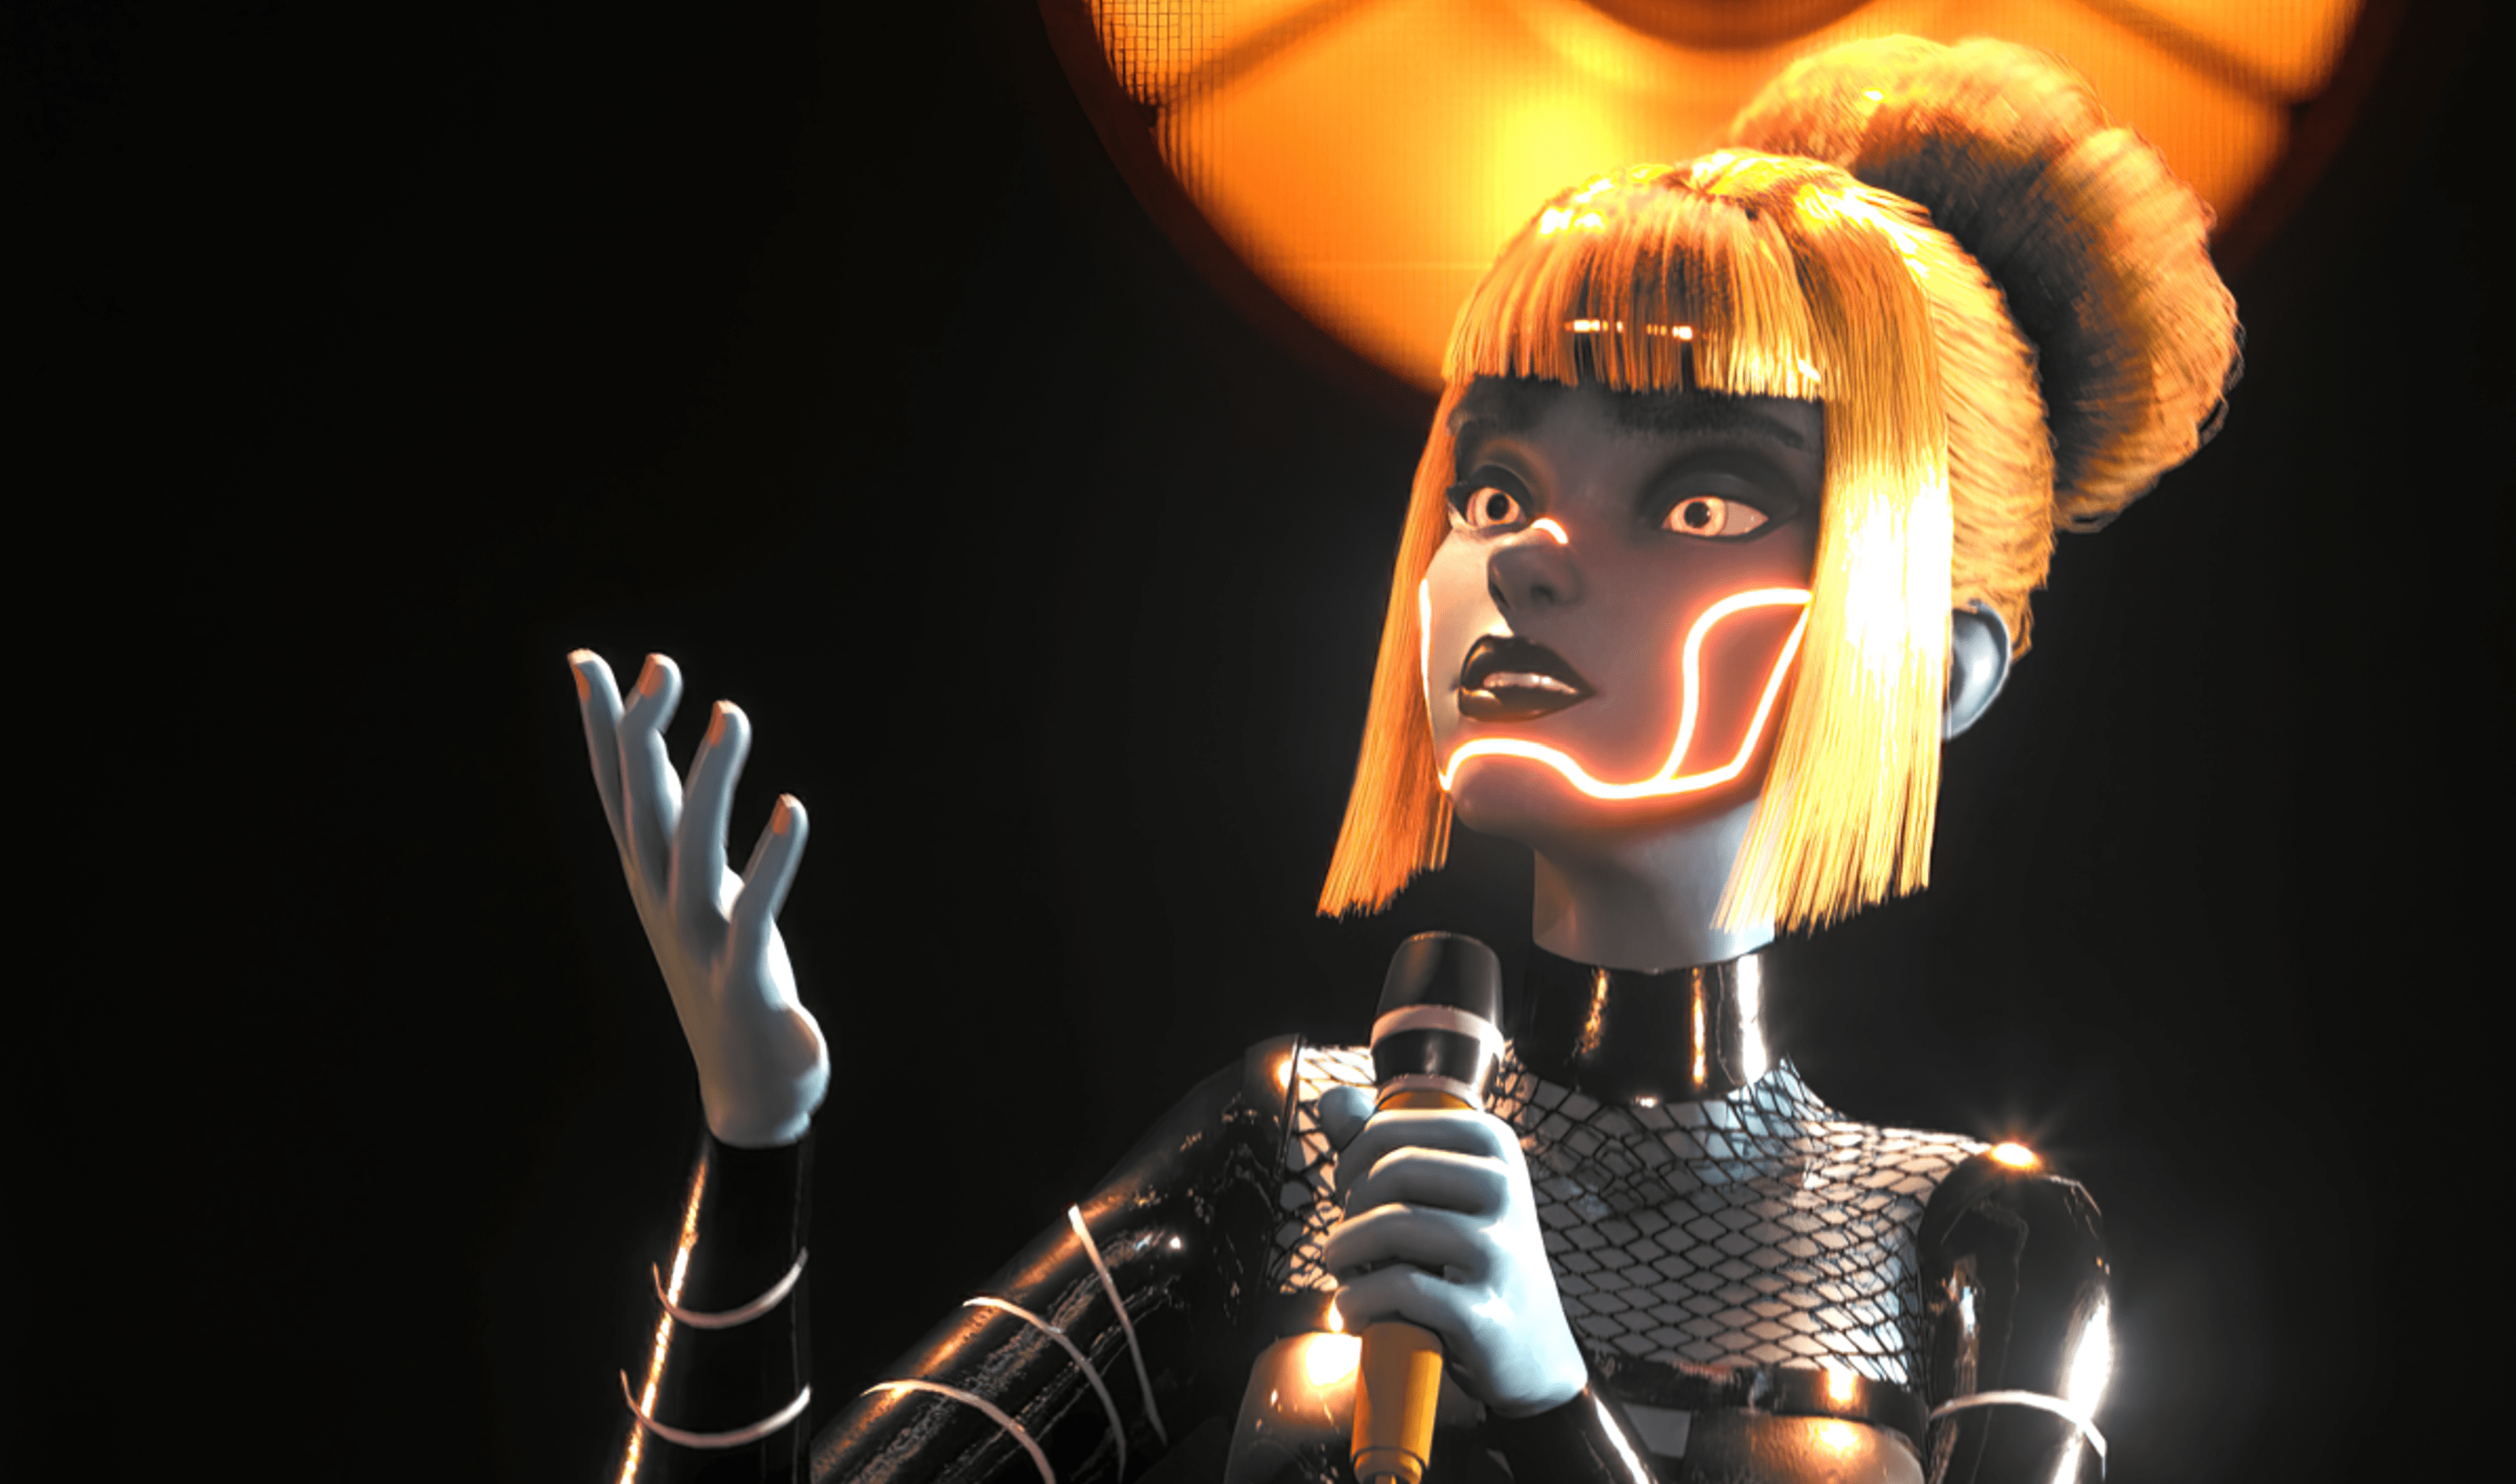 AR female avatar holding microphone and singing